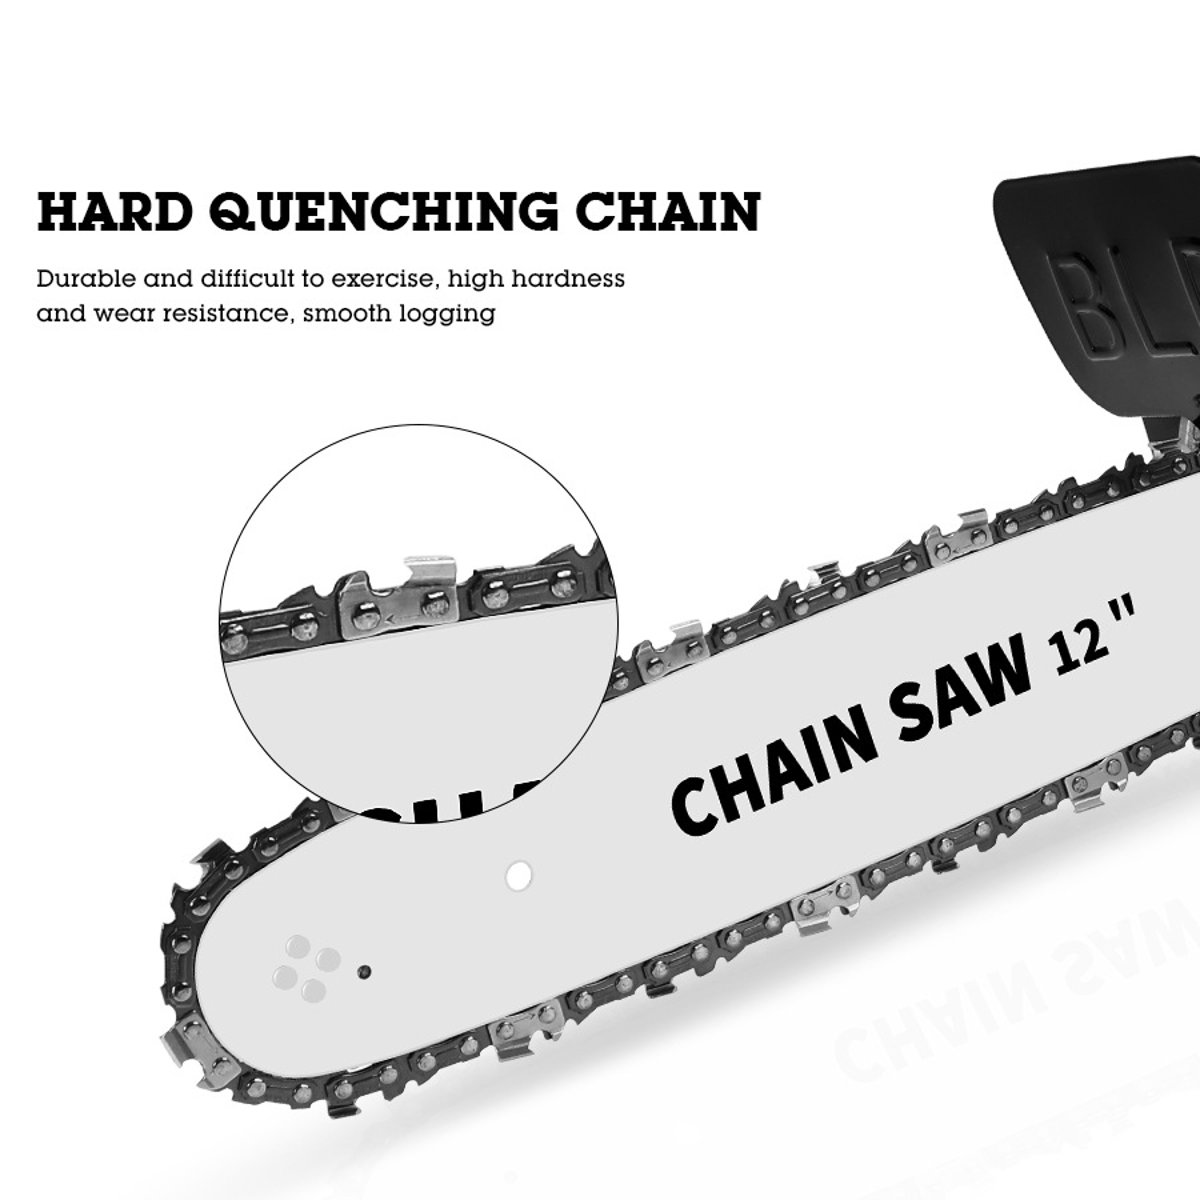 12-Inch-Chainsaw-Bracket-Electric-Chain-Saw-Stand-Set-Part-For-100-Angle-Grinder-1755370